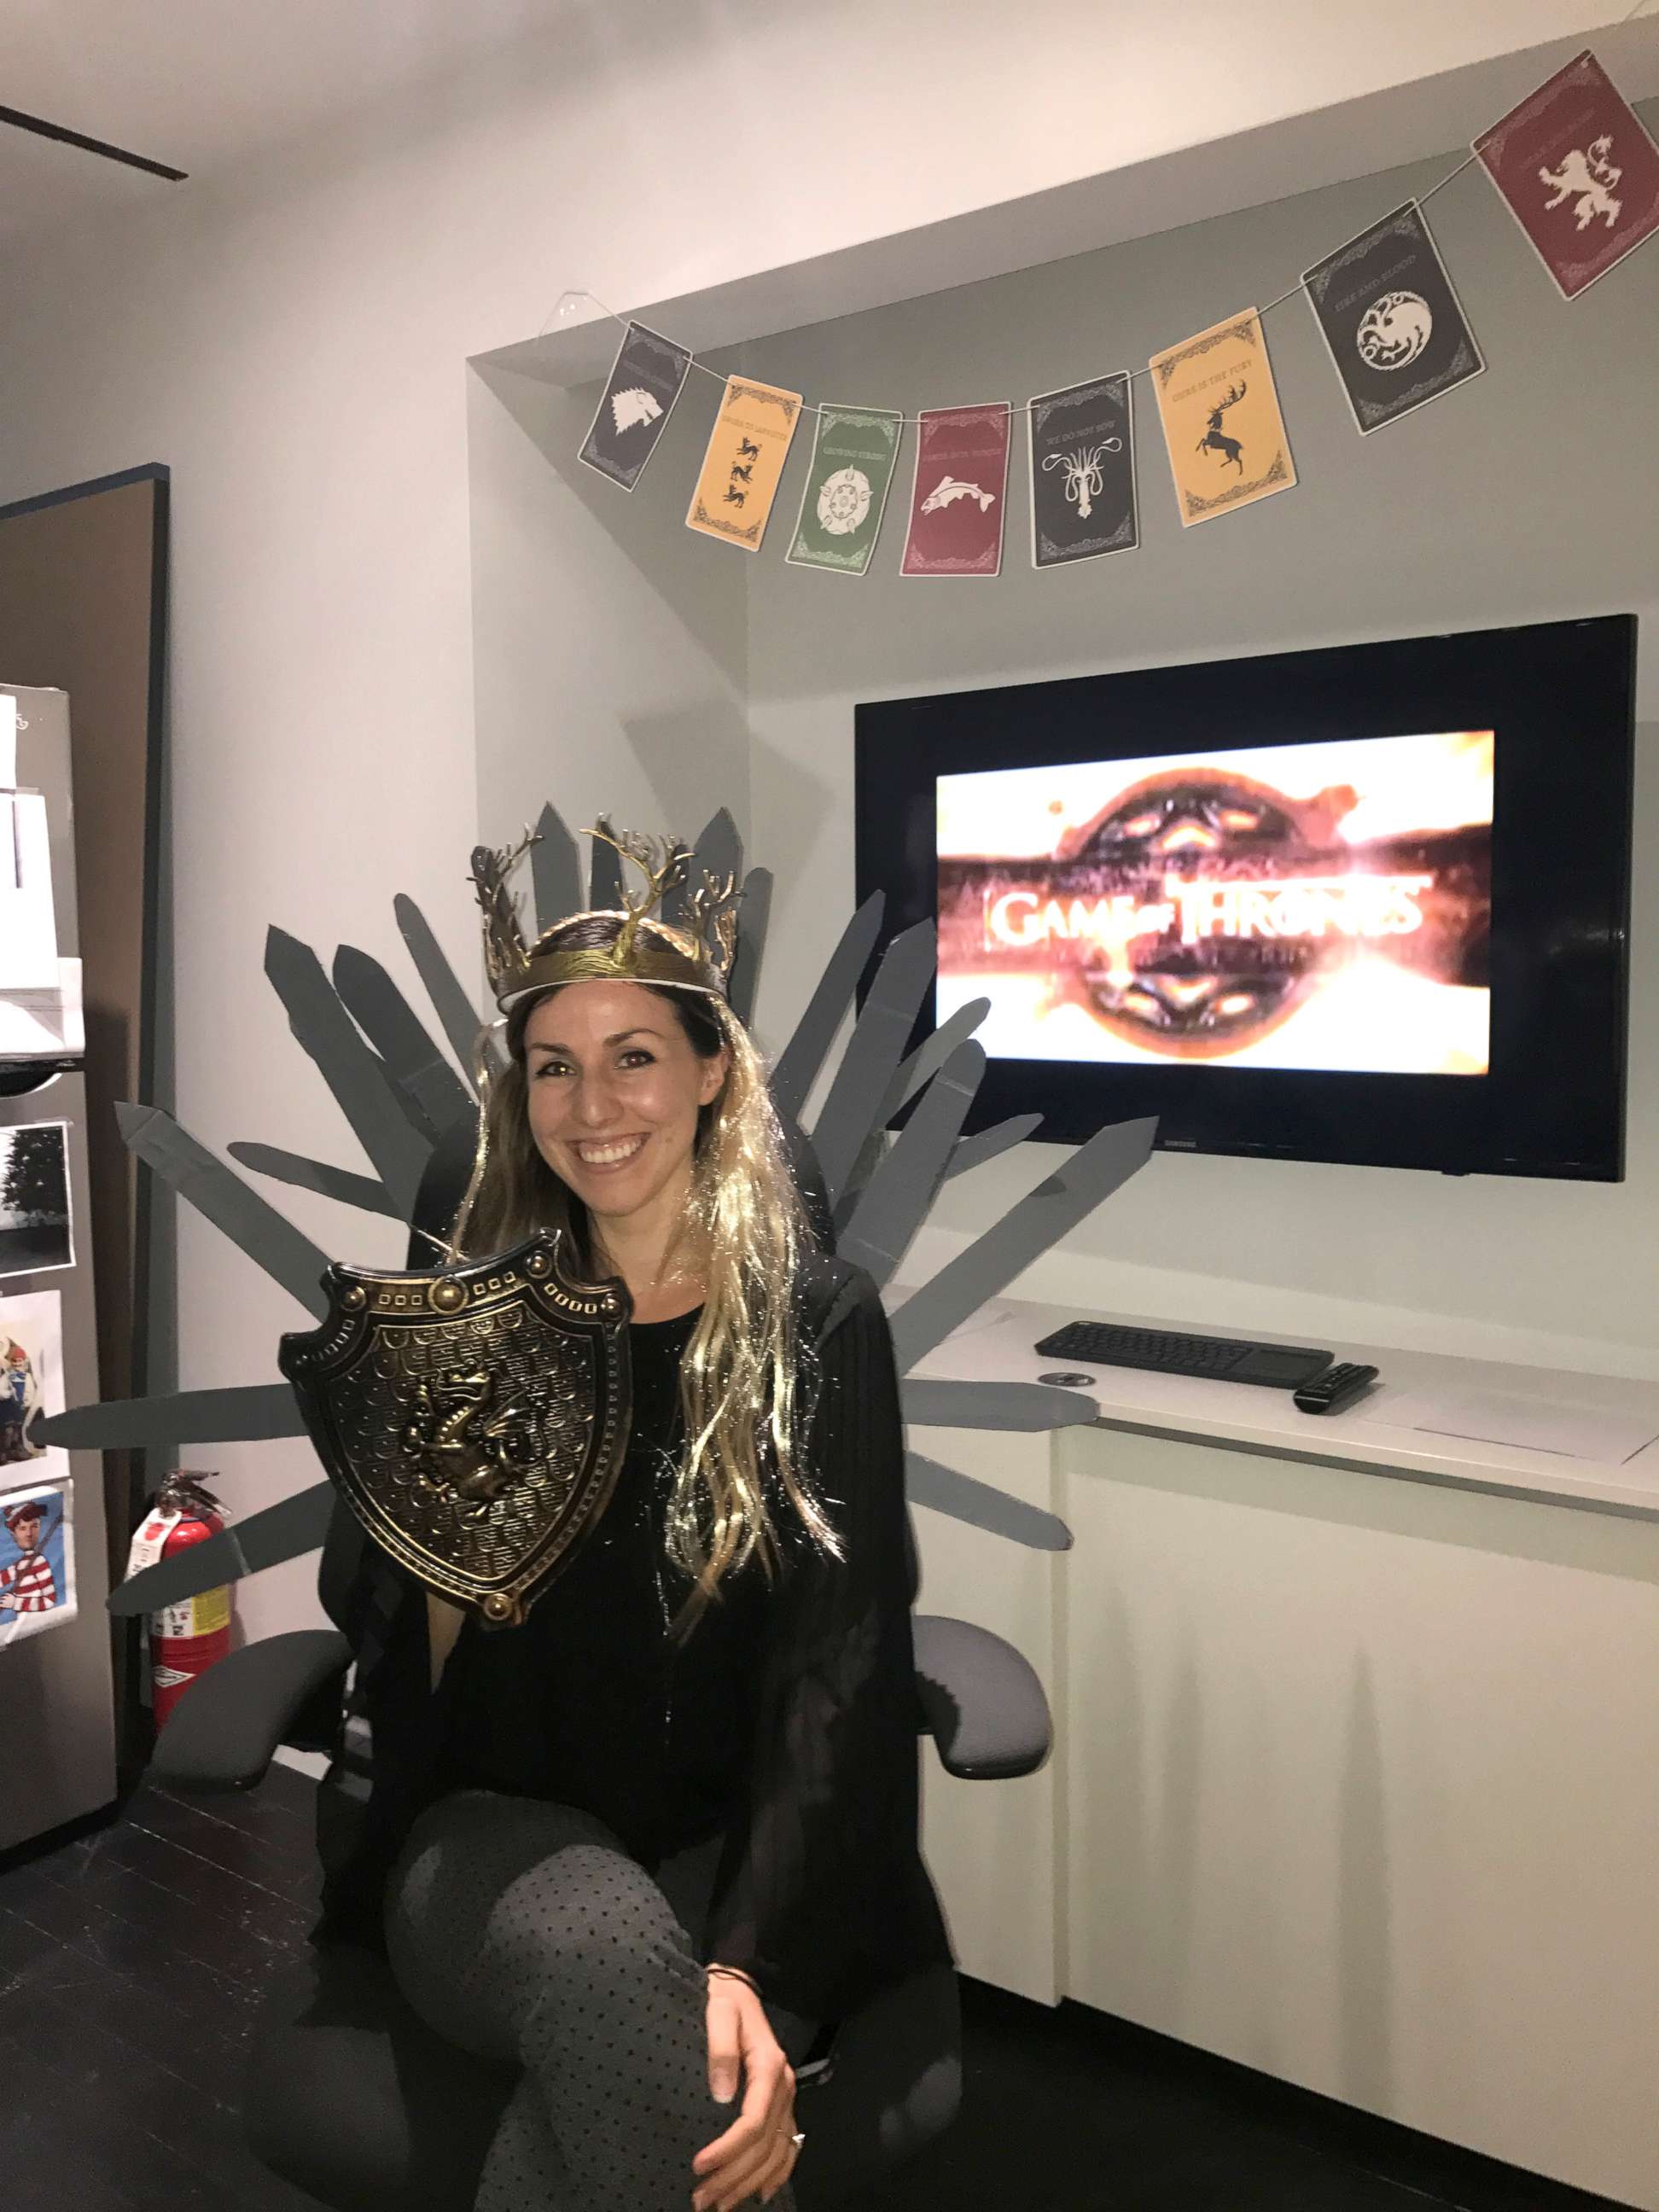 PHOTO: Bride-to-be Caitlin Revuelta was surprised by her colleagues at Humanscale with an elaborate "Game of Thrones"-themed shower on Sept. 27 in New York City.